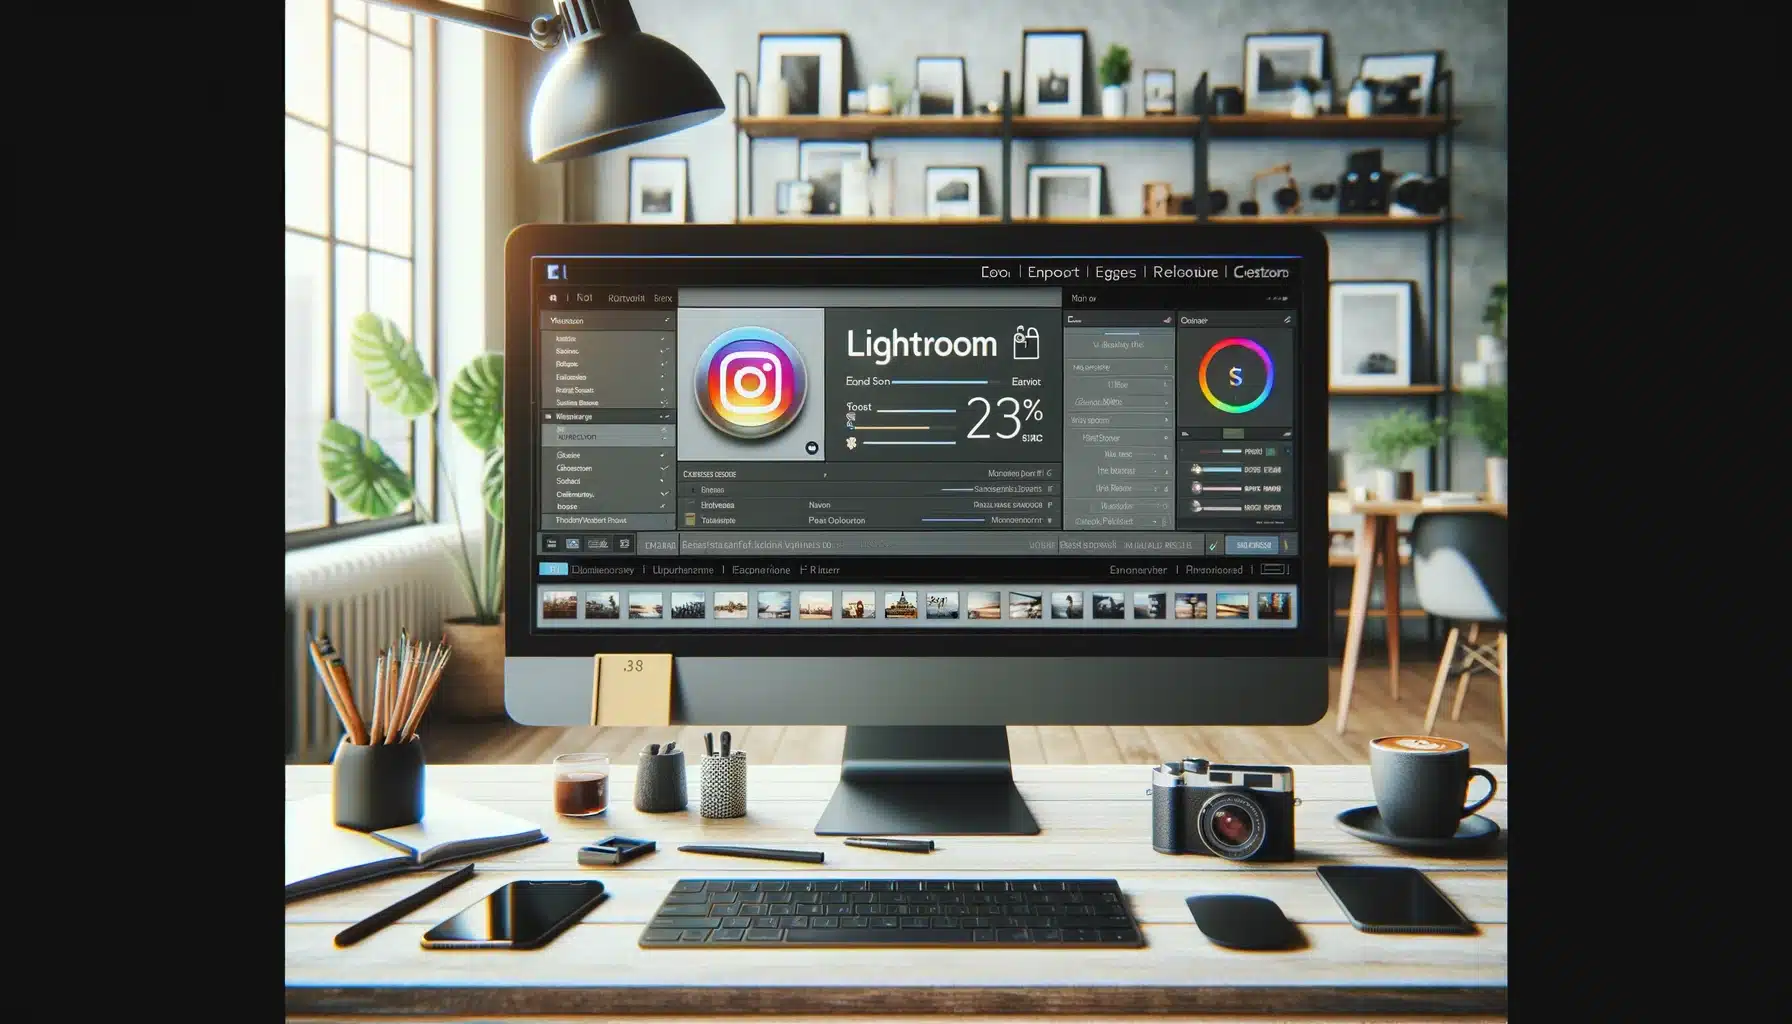 A modern desk setup with a high-resolution monitor displaying Lightroom export settings for Instagram, surrounded by a smartphone, coffee cup, and editing tools.